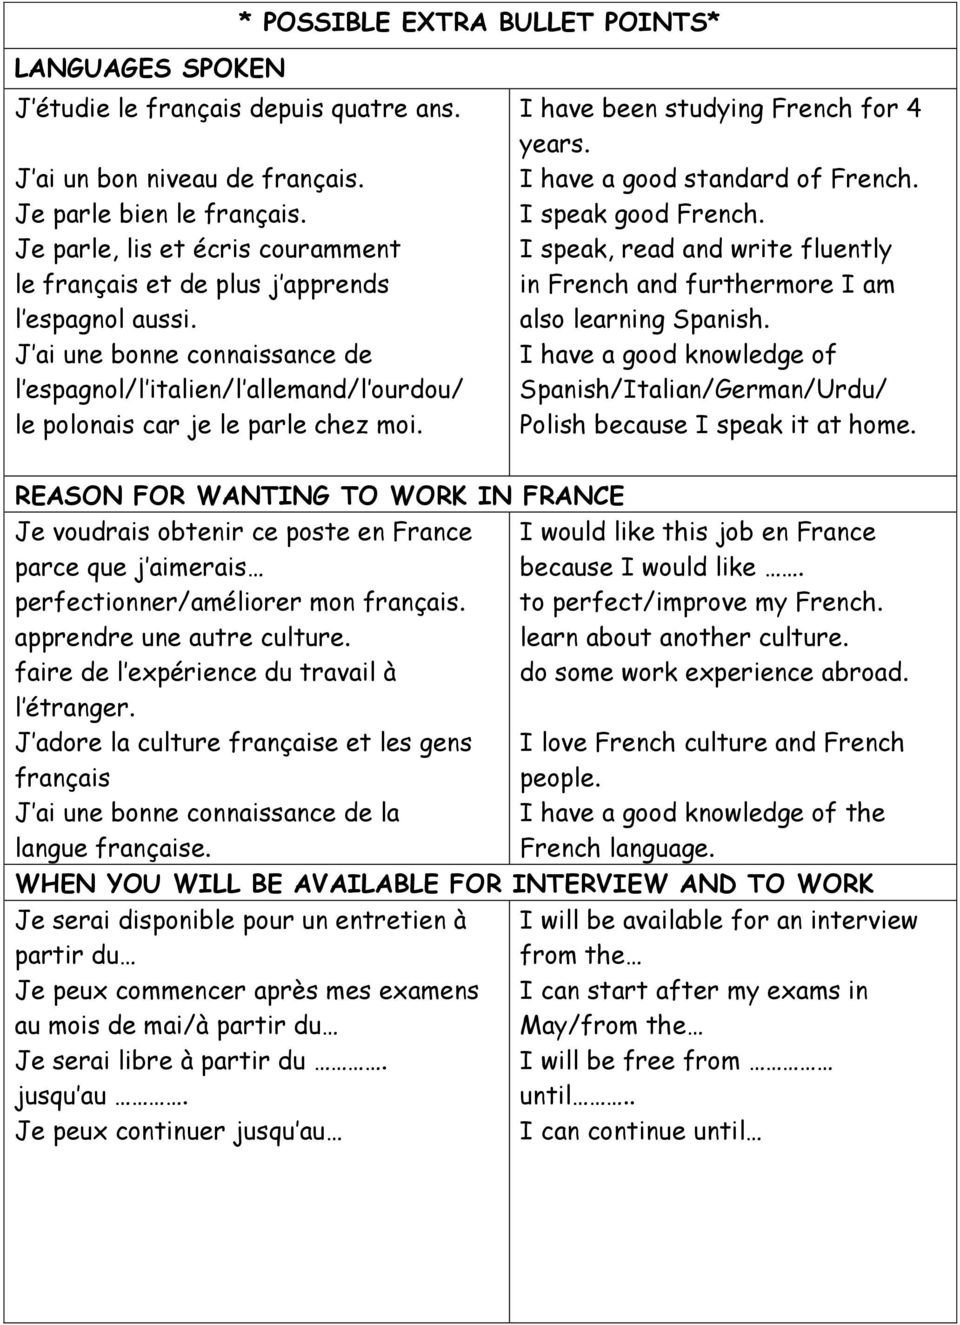 I have been studying French for 4 years. I have a good standard of French. I speak good French. I speak, read and write fluently in French and furthermore I am also learning Spanish.